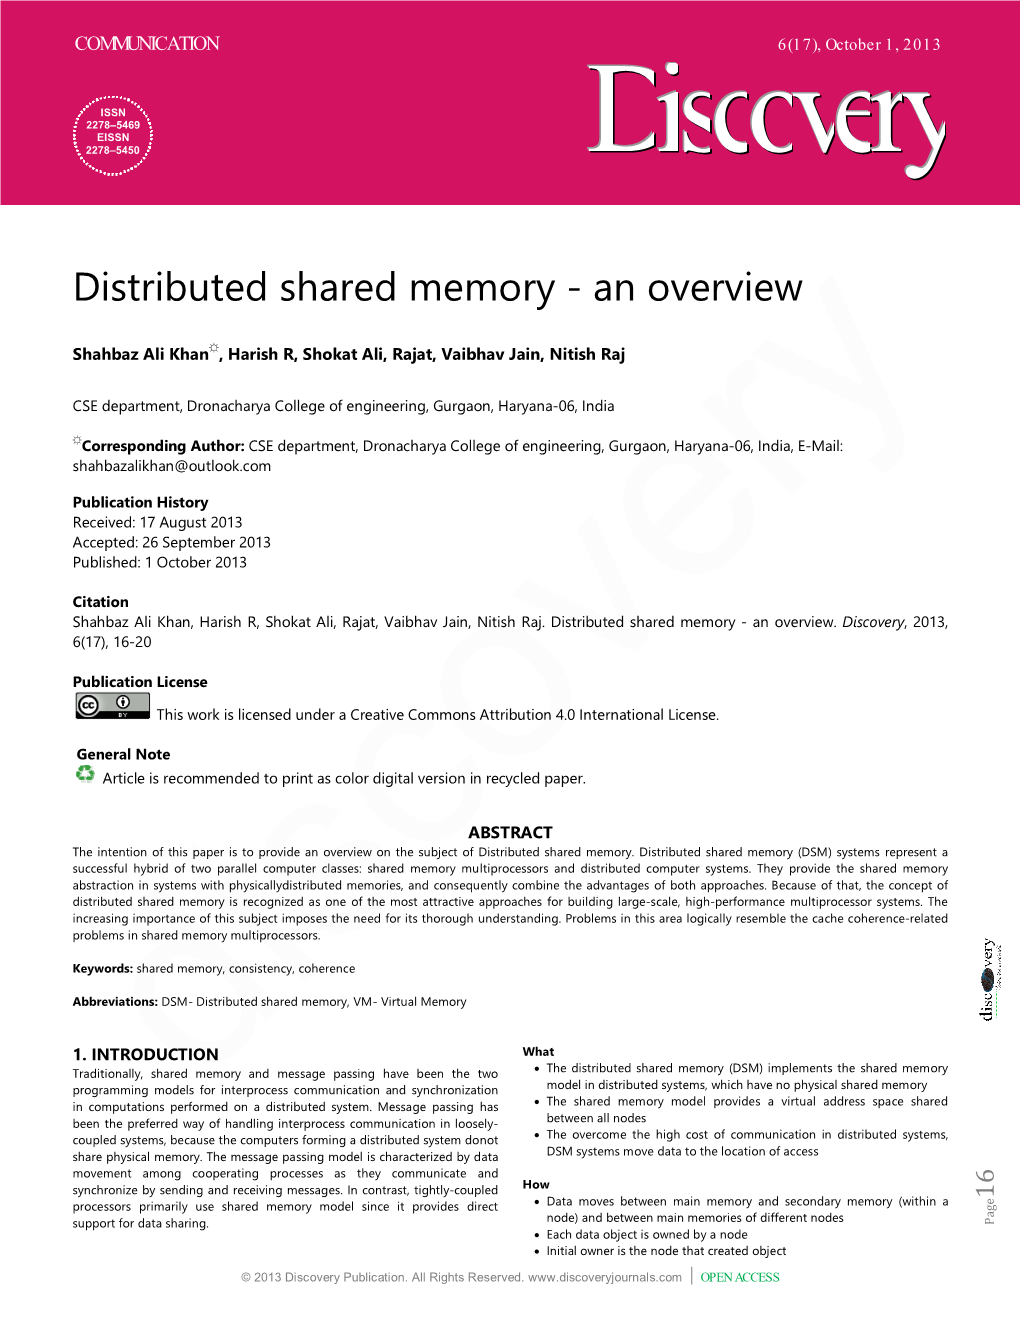 Distributed Shared Memory - an Overview